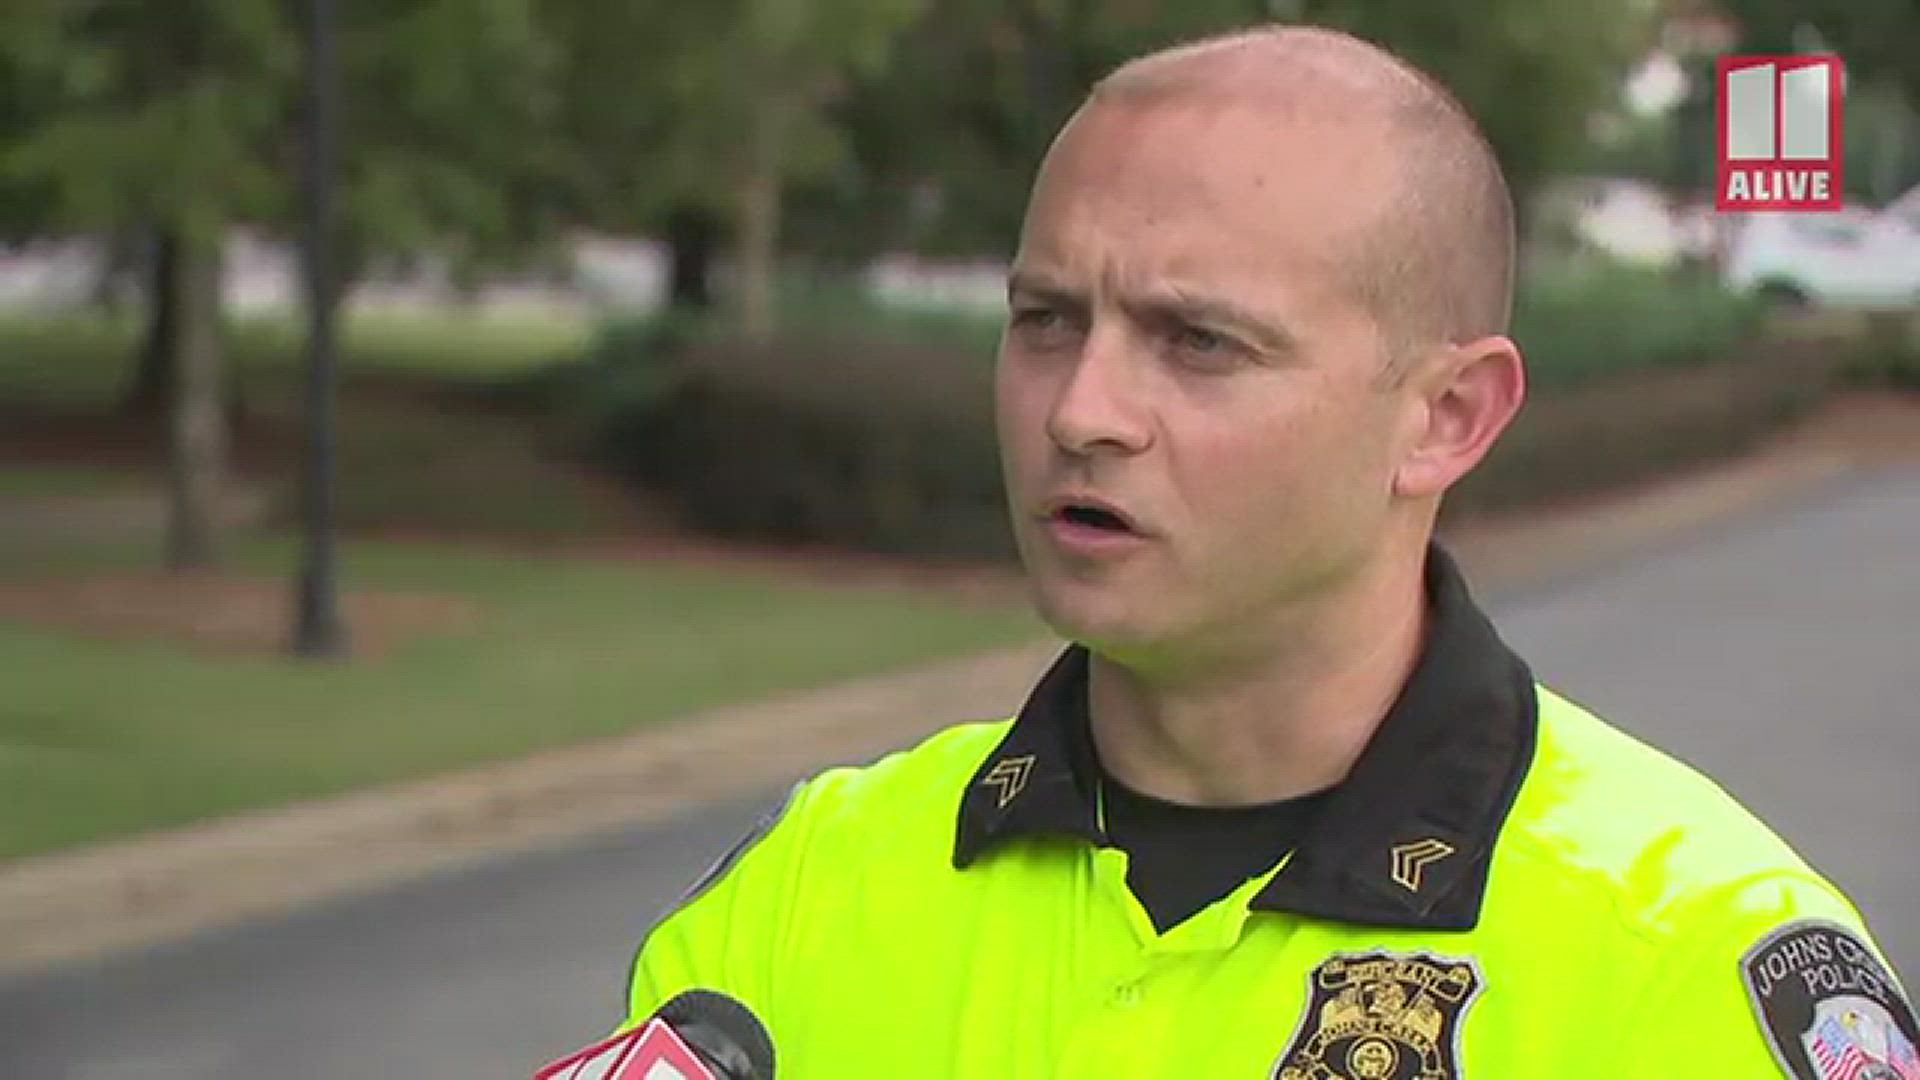 Sgt. Tyler Seymour of Johns Creek Police gave an update on the active situation.